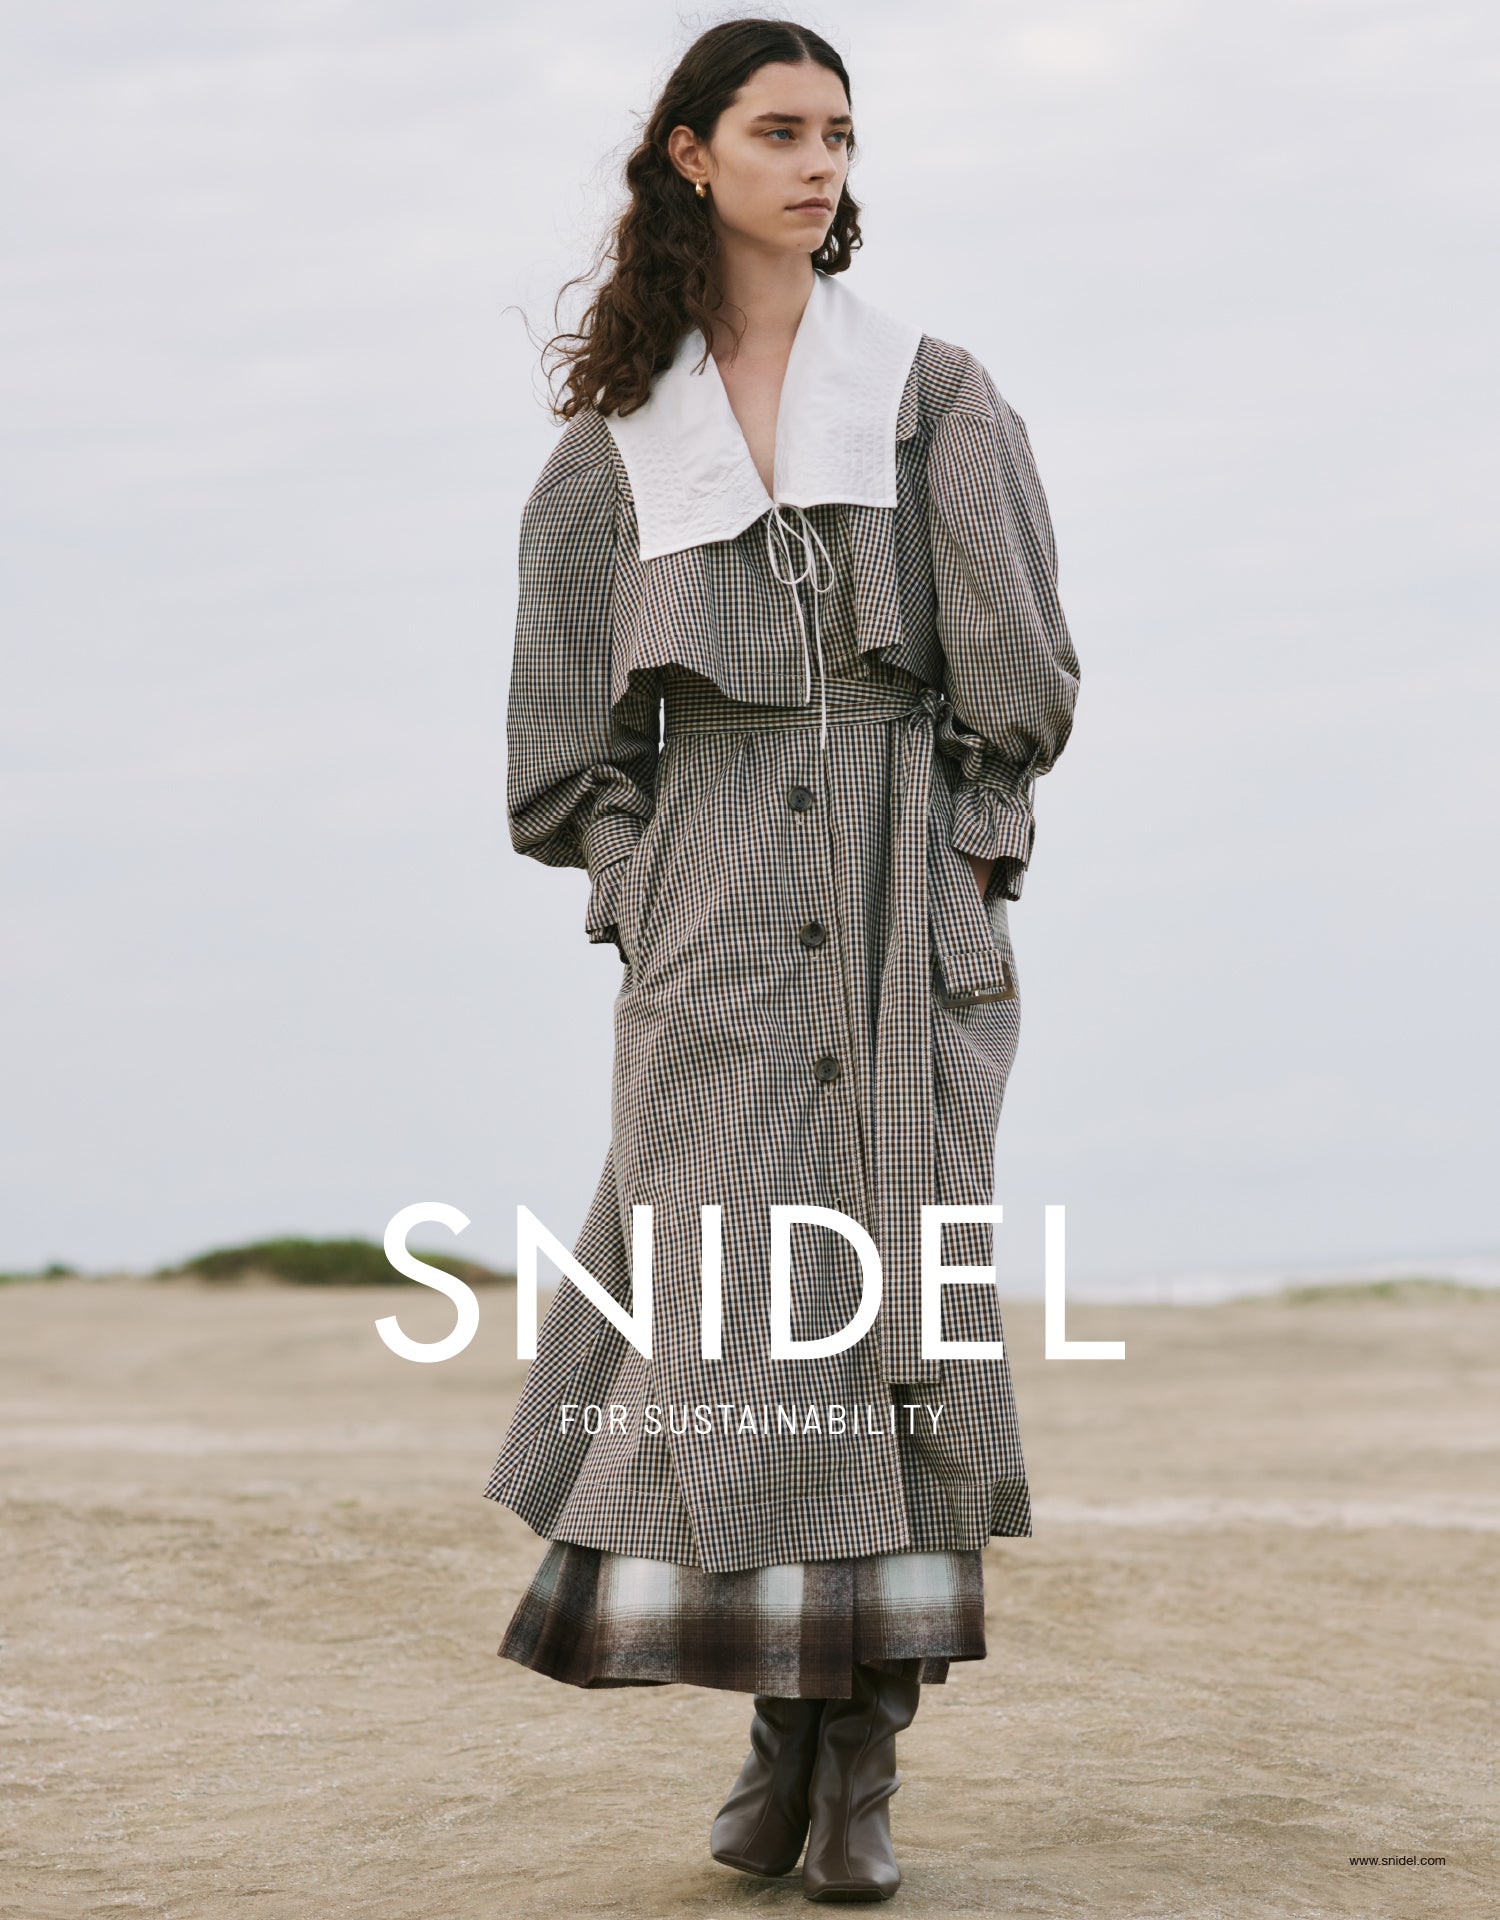 About SNIDEL